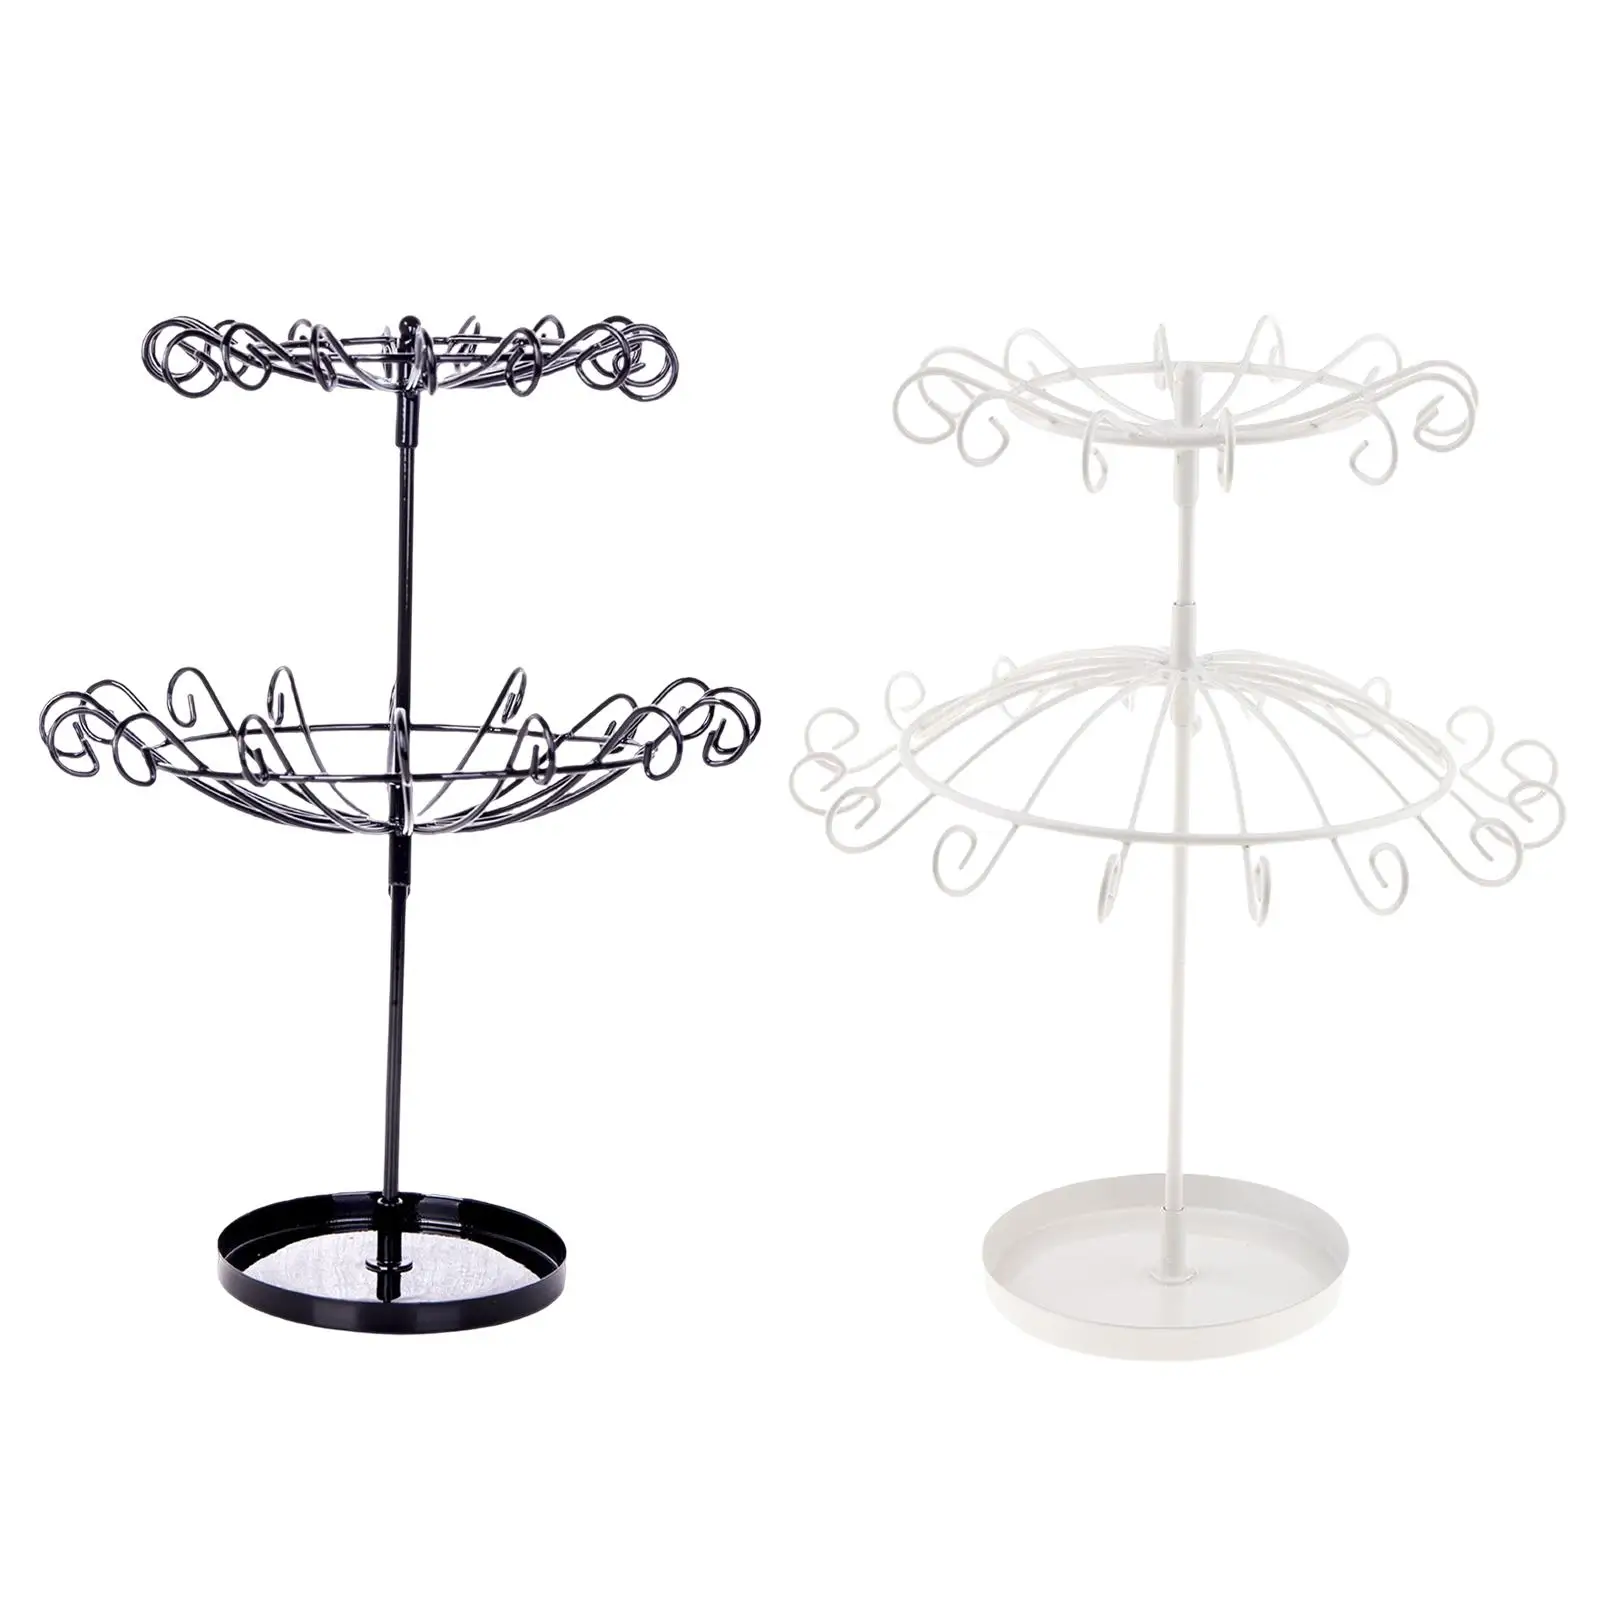 Metal Rotating Jewelry Stand Organizer Jewelry Display Stand for Necklaces